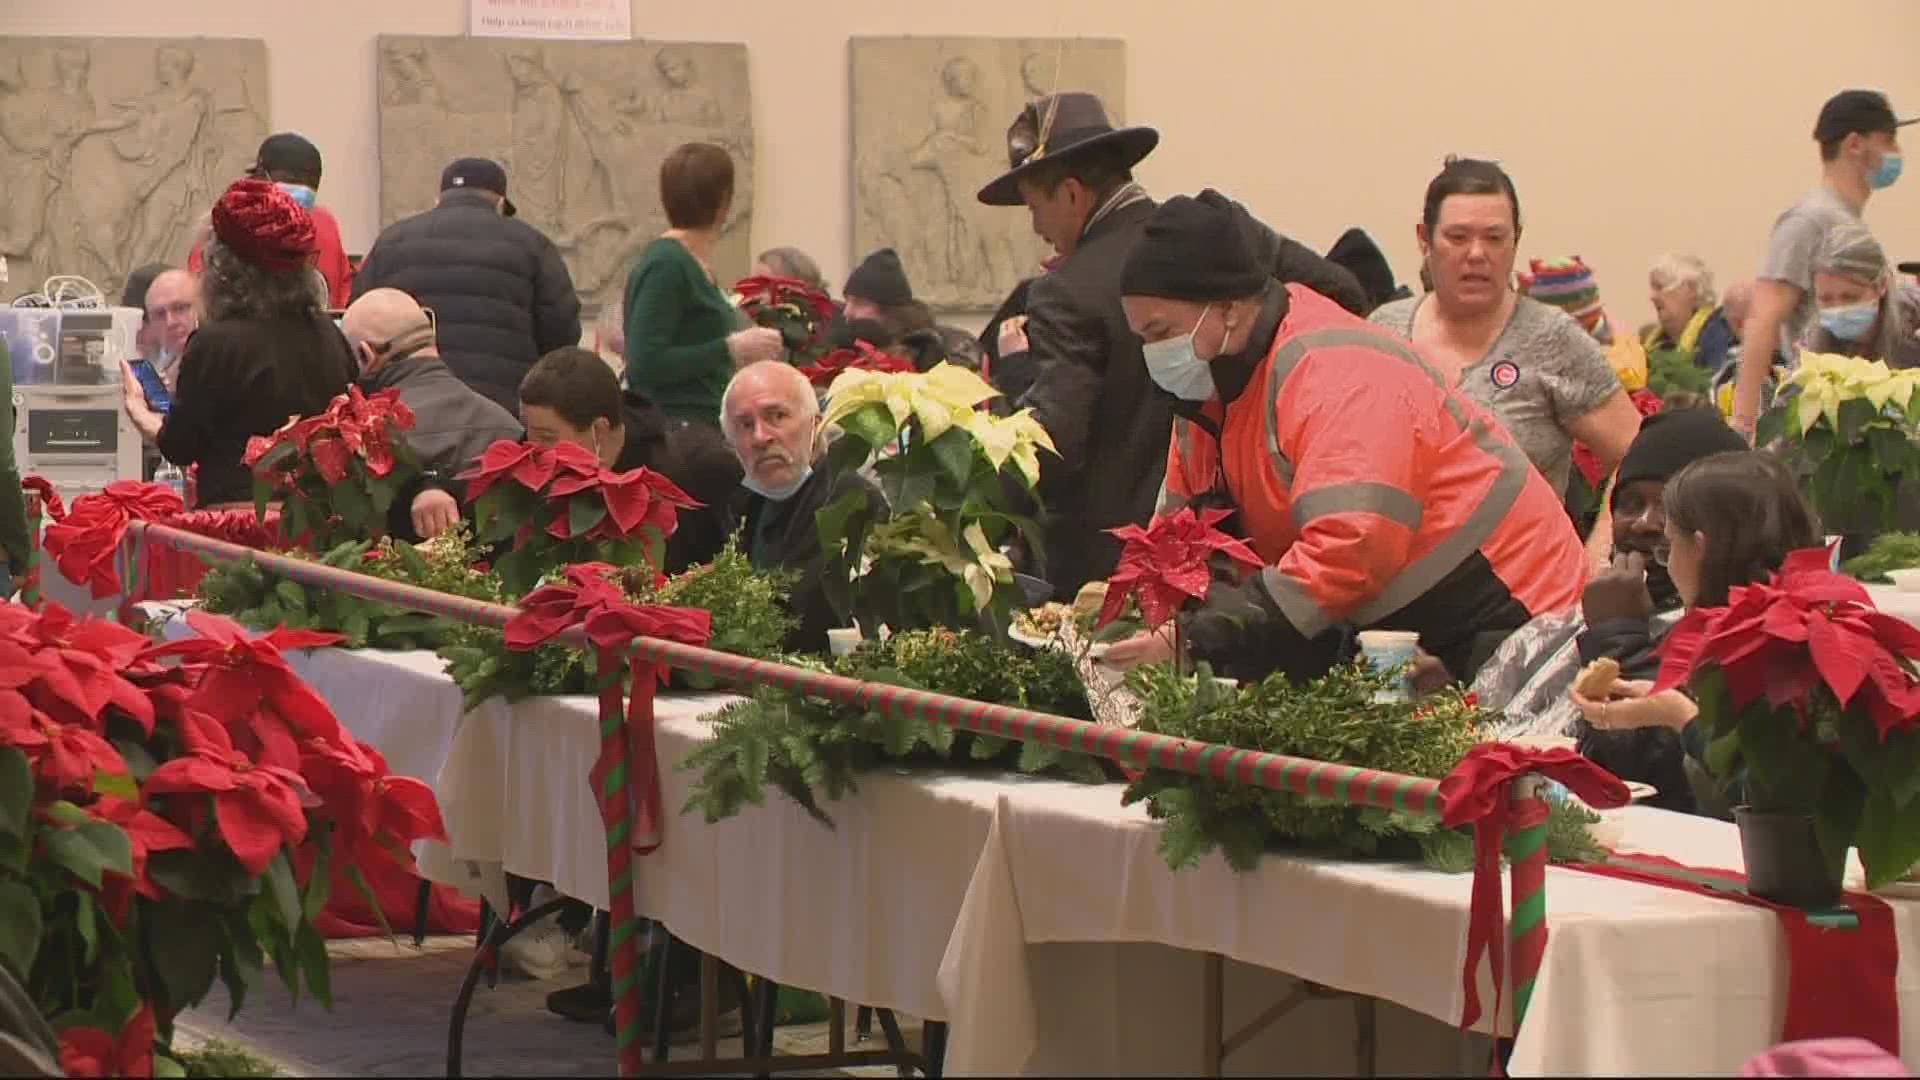 Potluck in the Park partners with the Portland Art Museum to serve more than a thousand meals prepared for Christmas day.